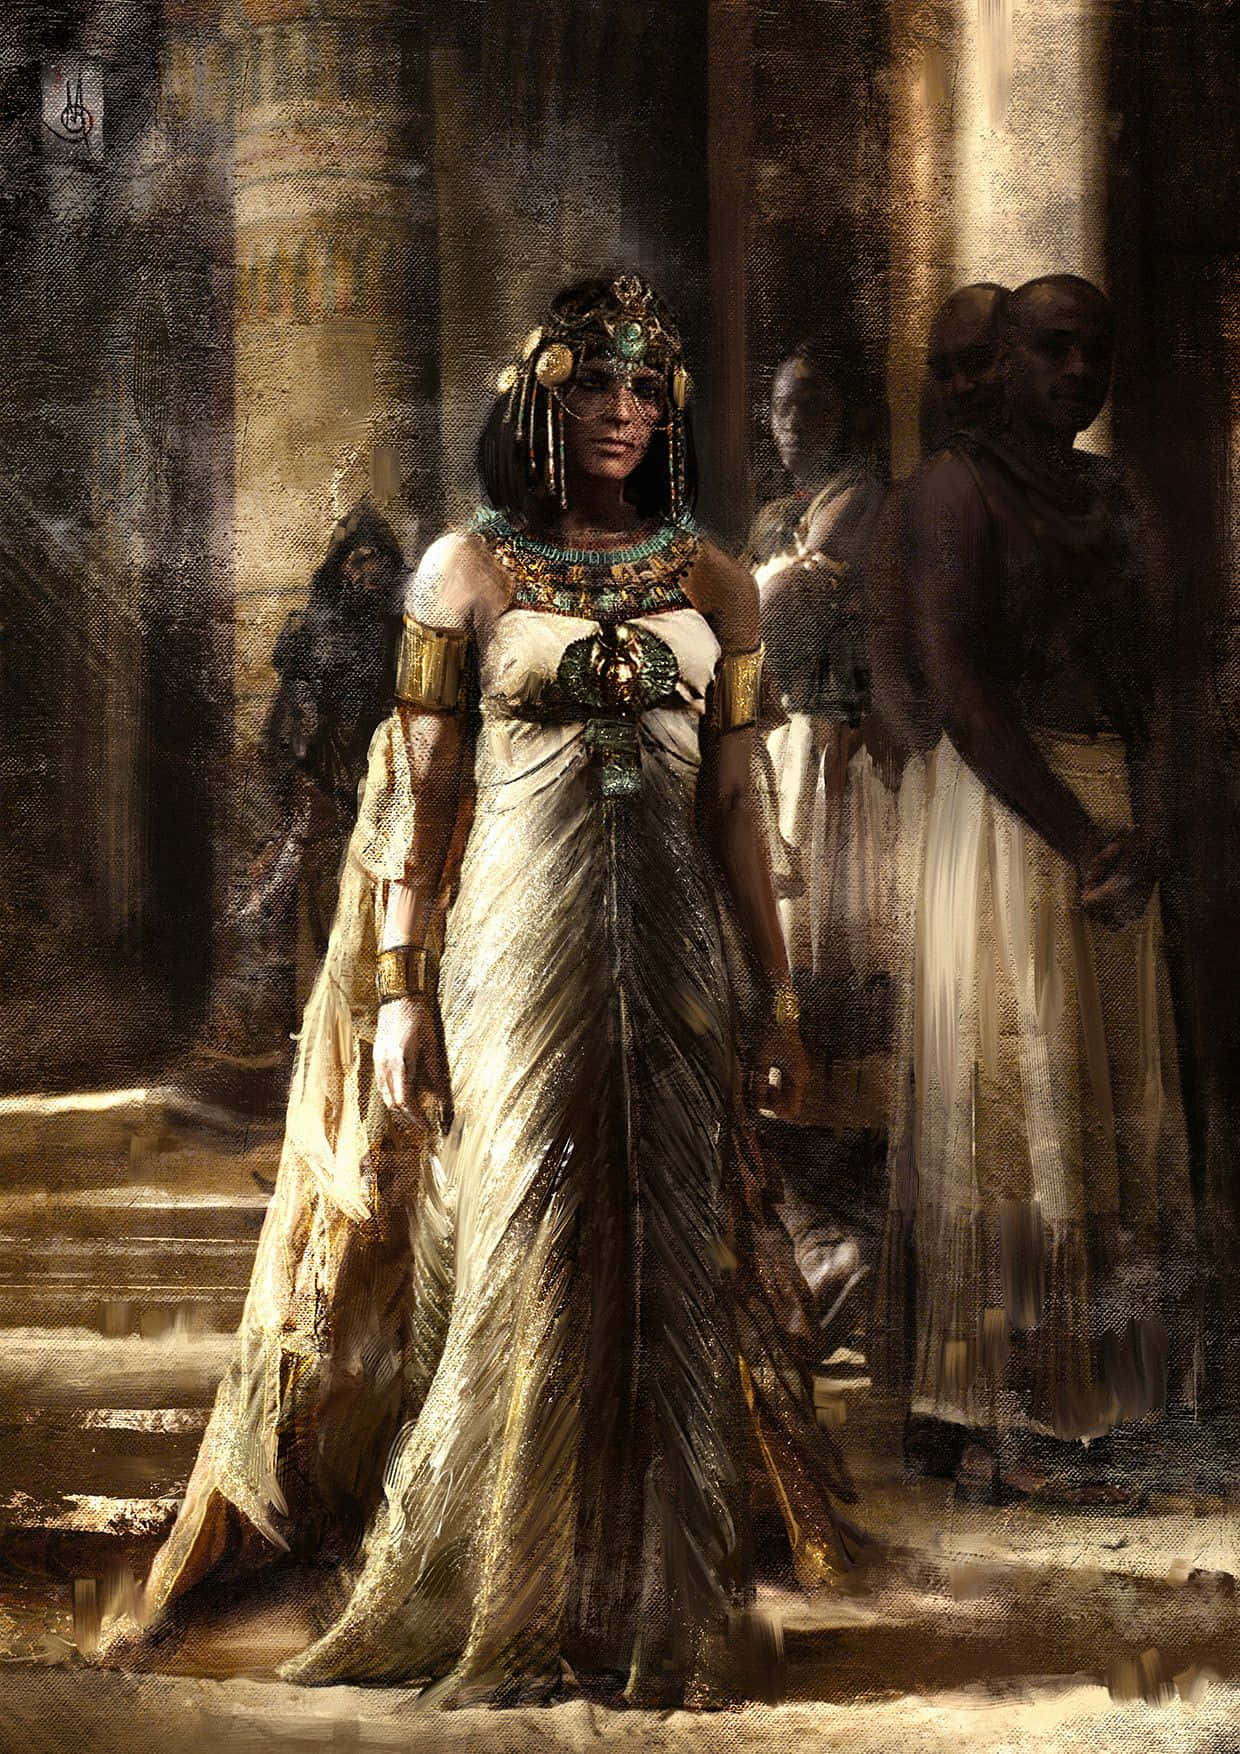 "Queen Cleopatra, an Icon of Ancient Egypt"